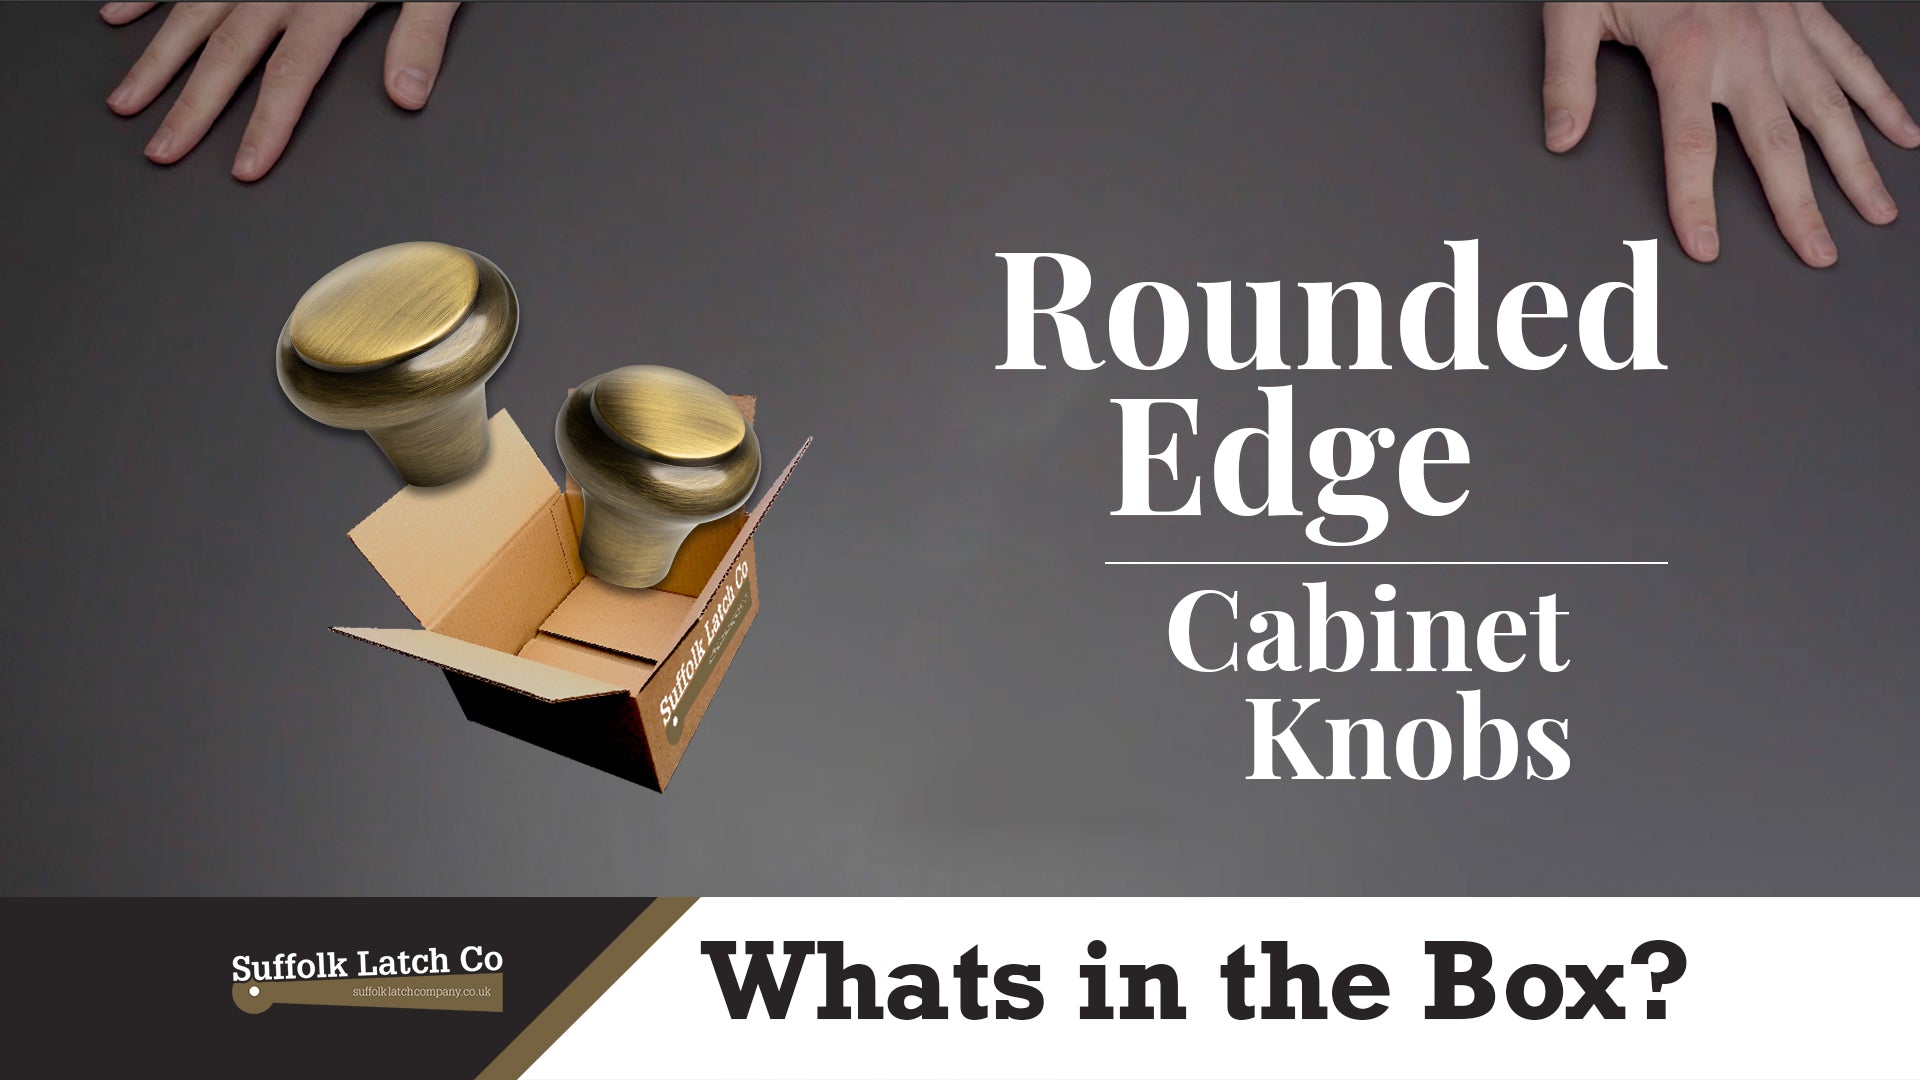 What's In The Box: Round Edge Cabinet Knobs